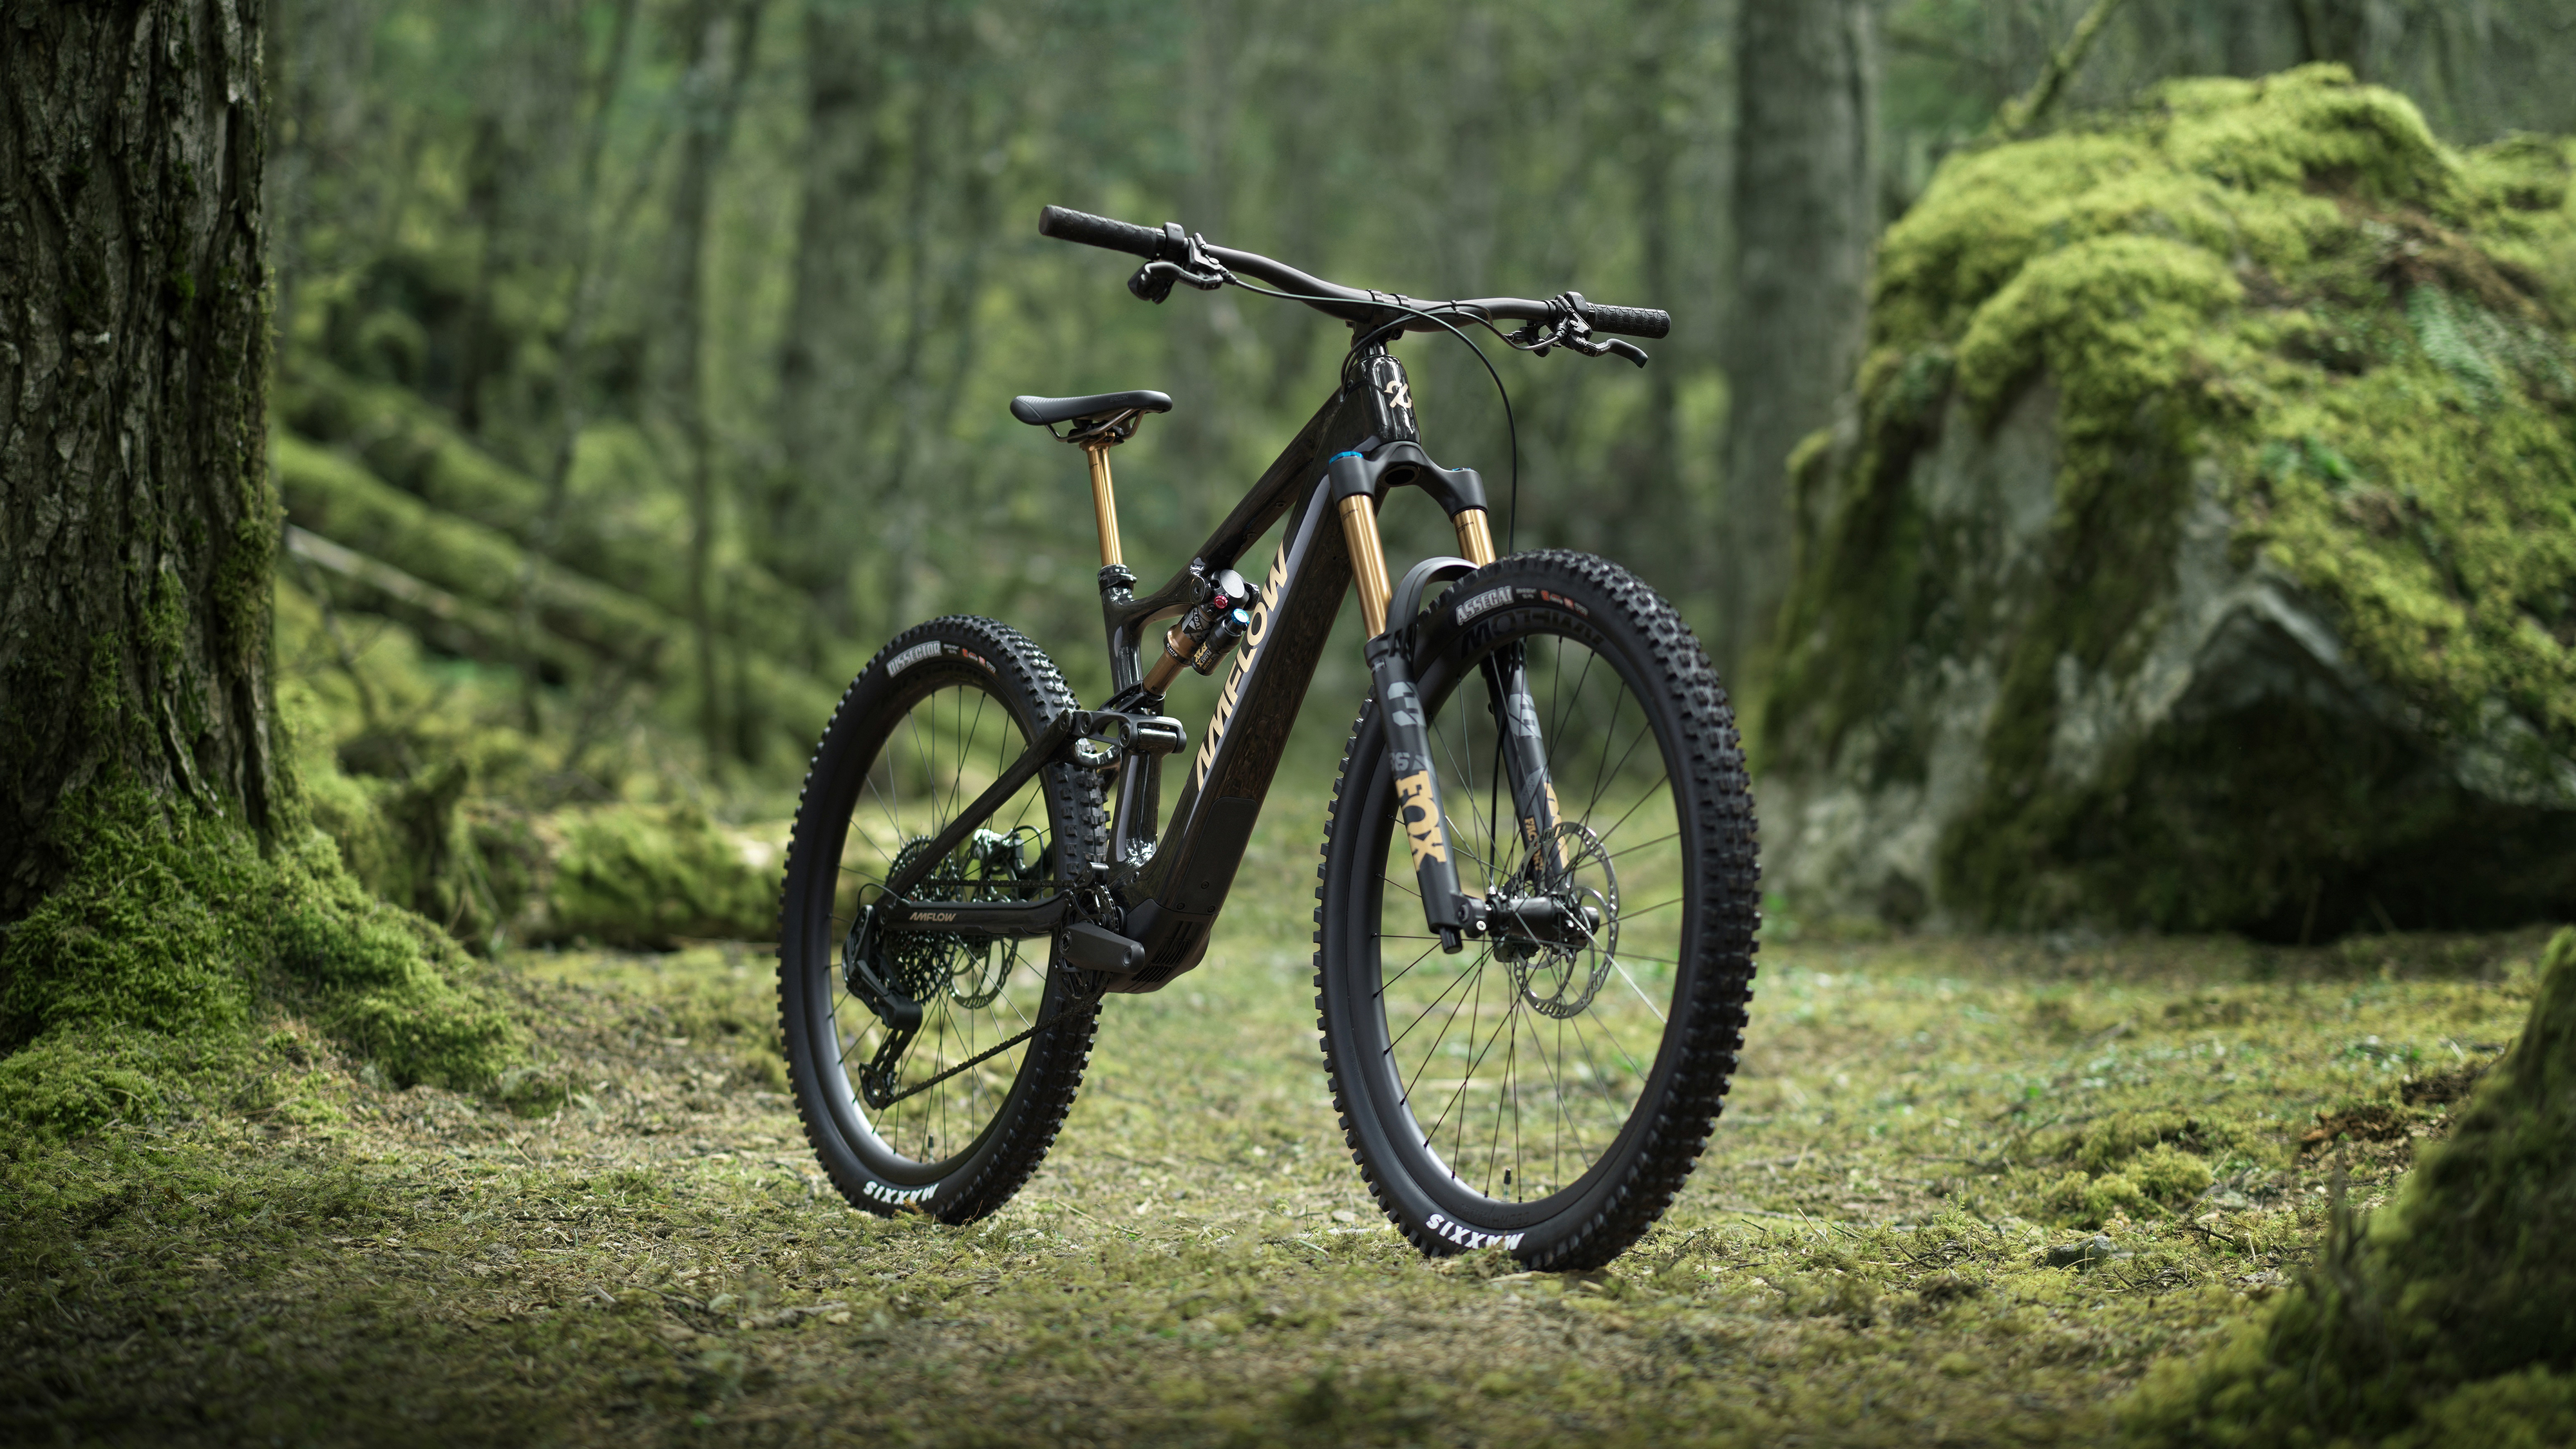 The Amflow PL electric mountain bike in a forest